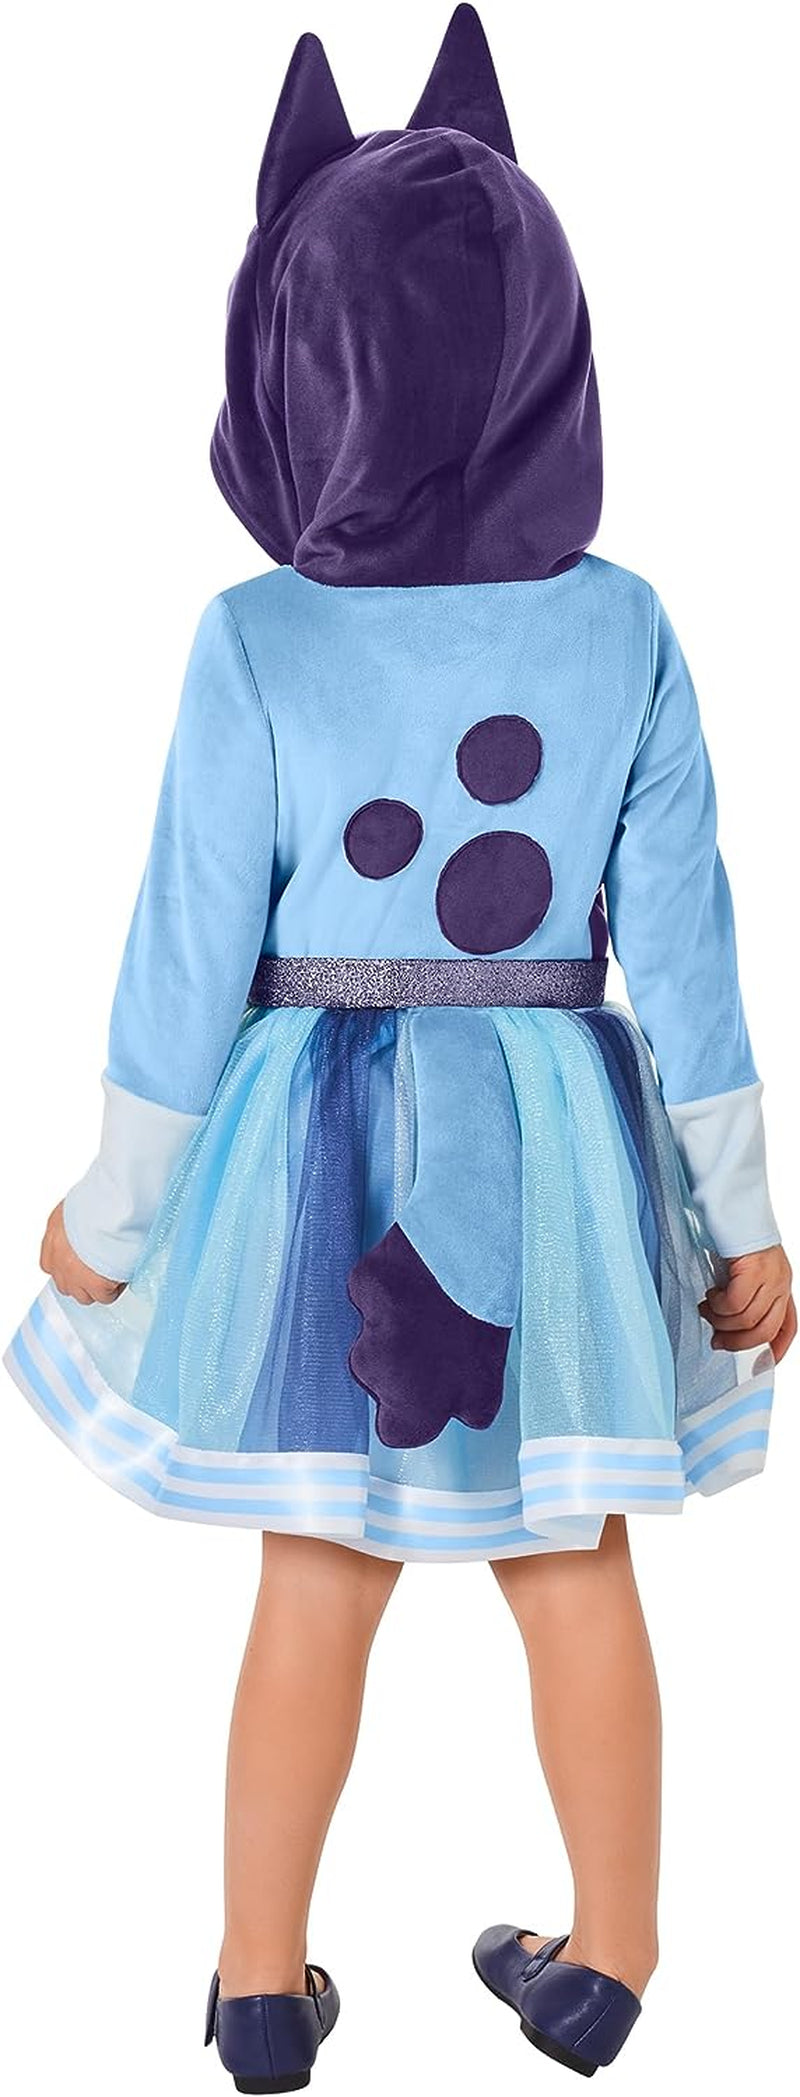 Spirit Halloween Bluey Toddler Costume | Officially Licensed | Theatrical Halloween Outfit  Spirit Halloween   